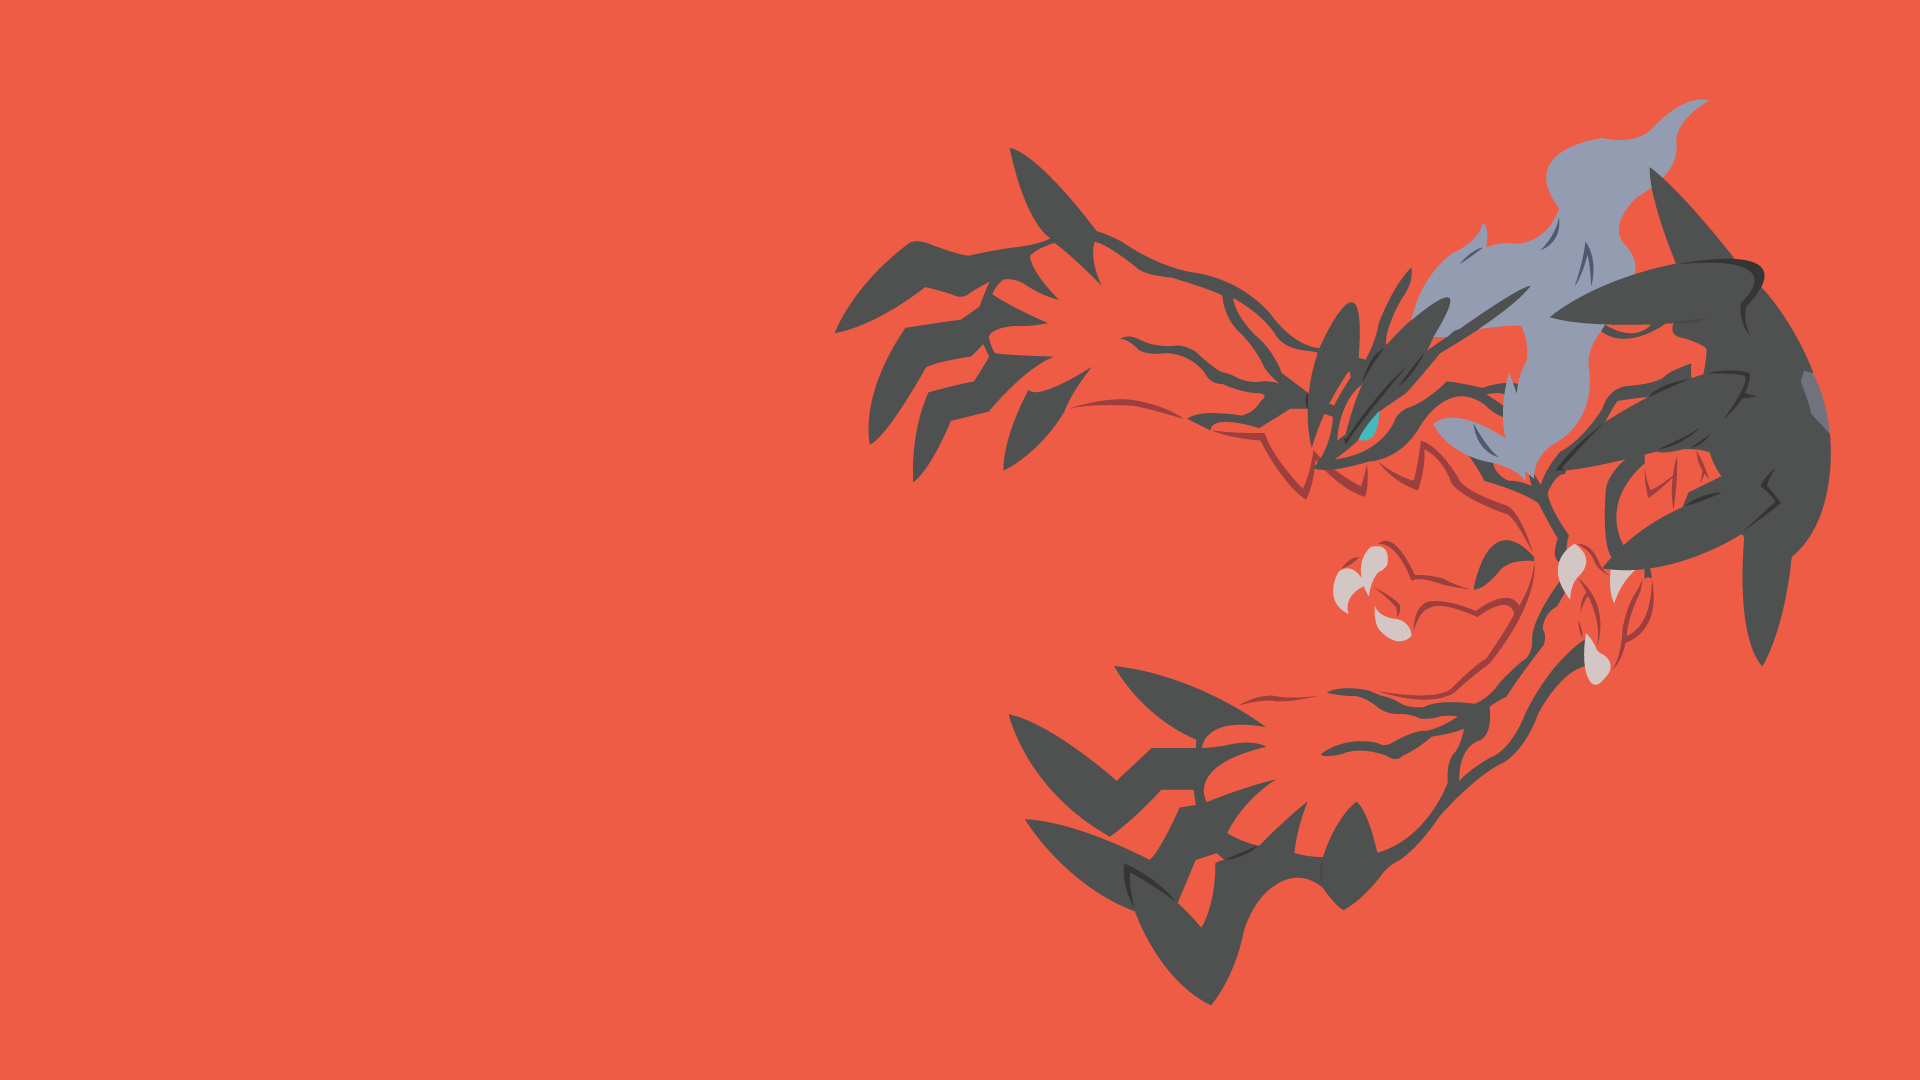 Yveltal Wallpaper Image Photo Picture Background